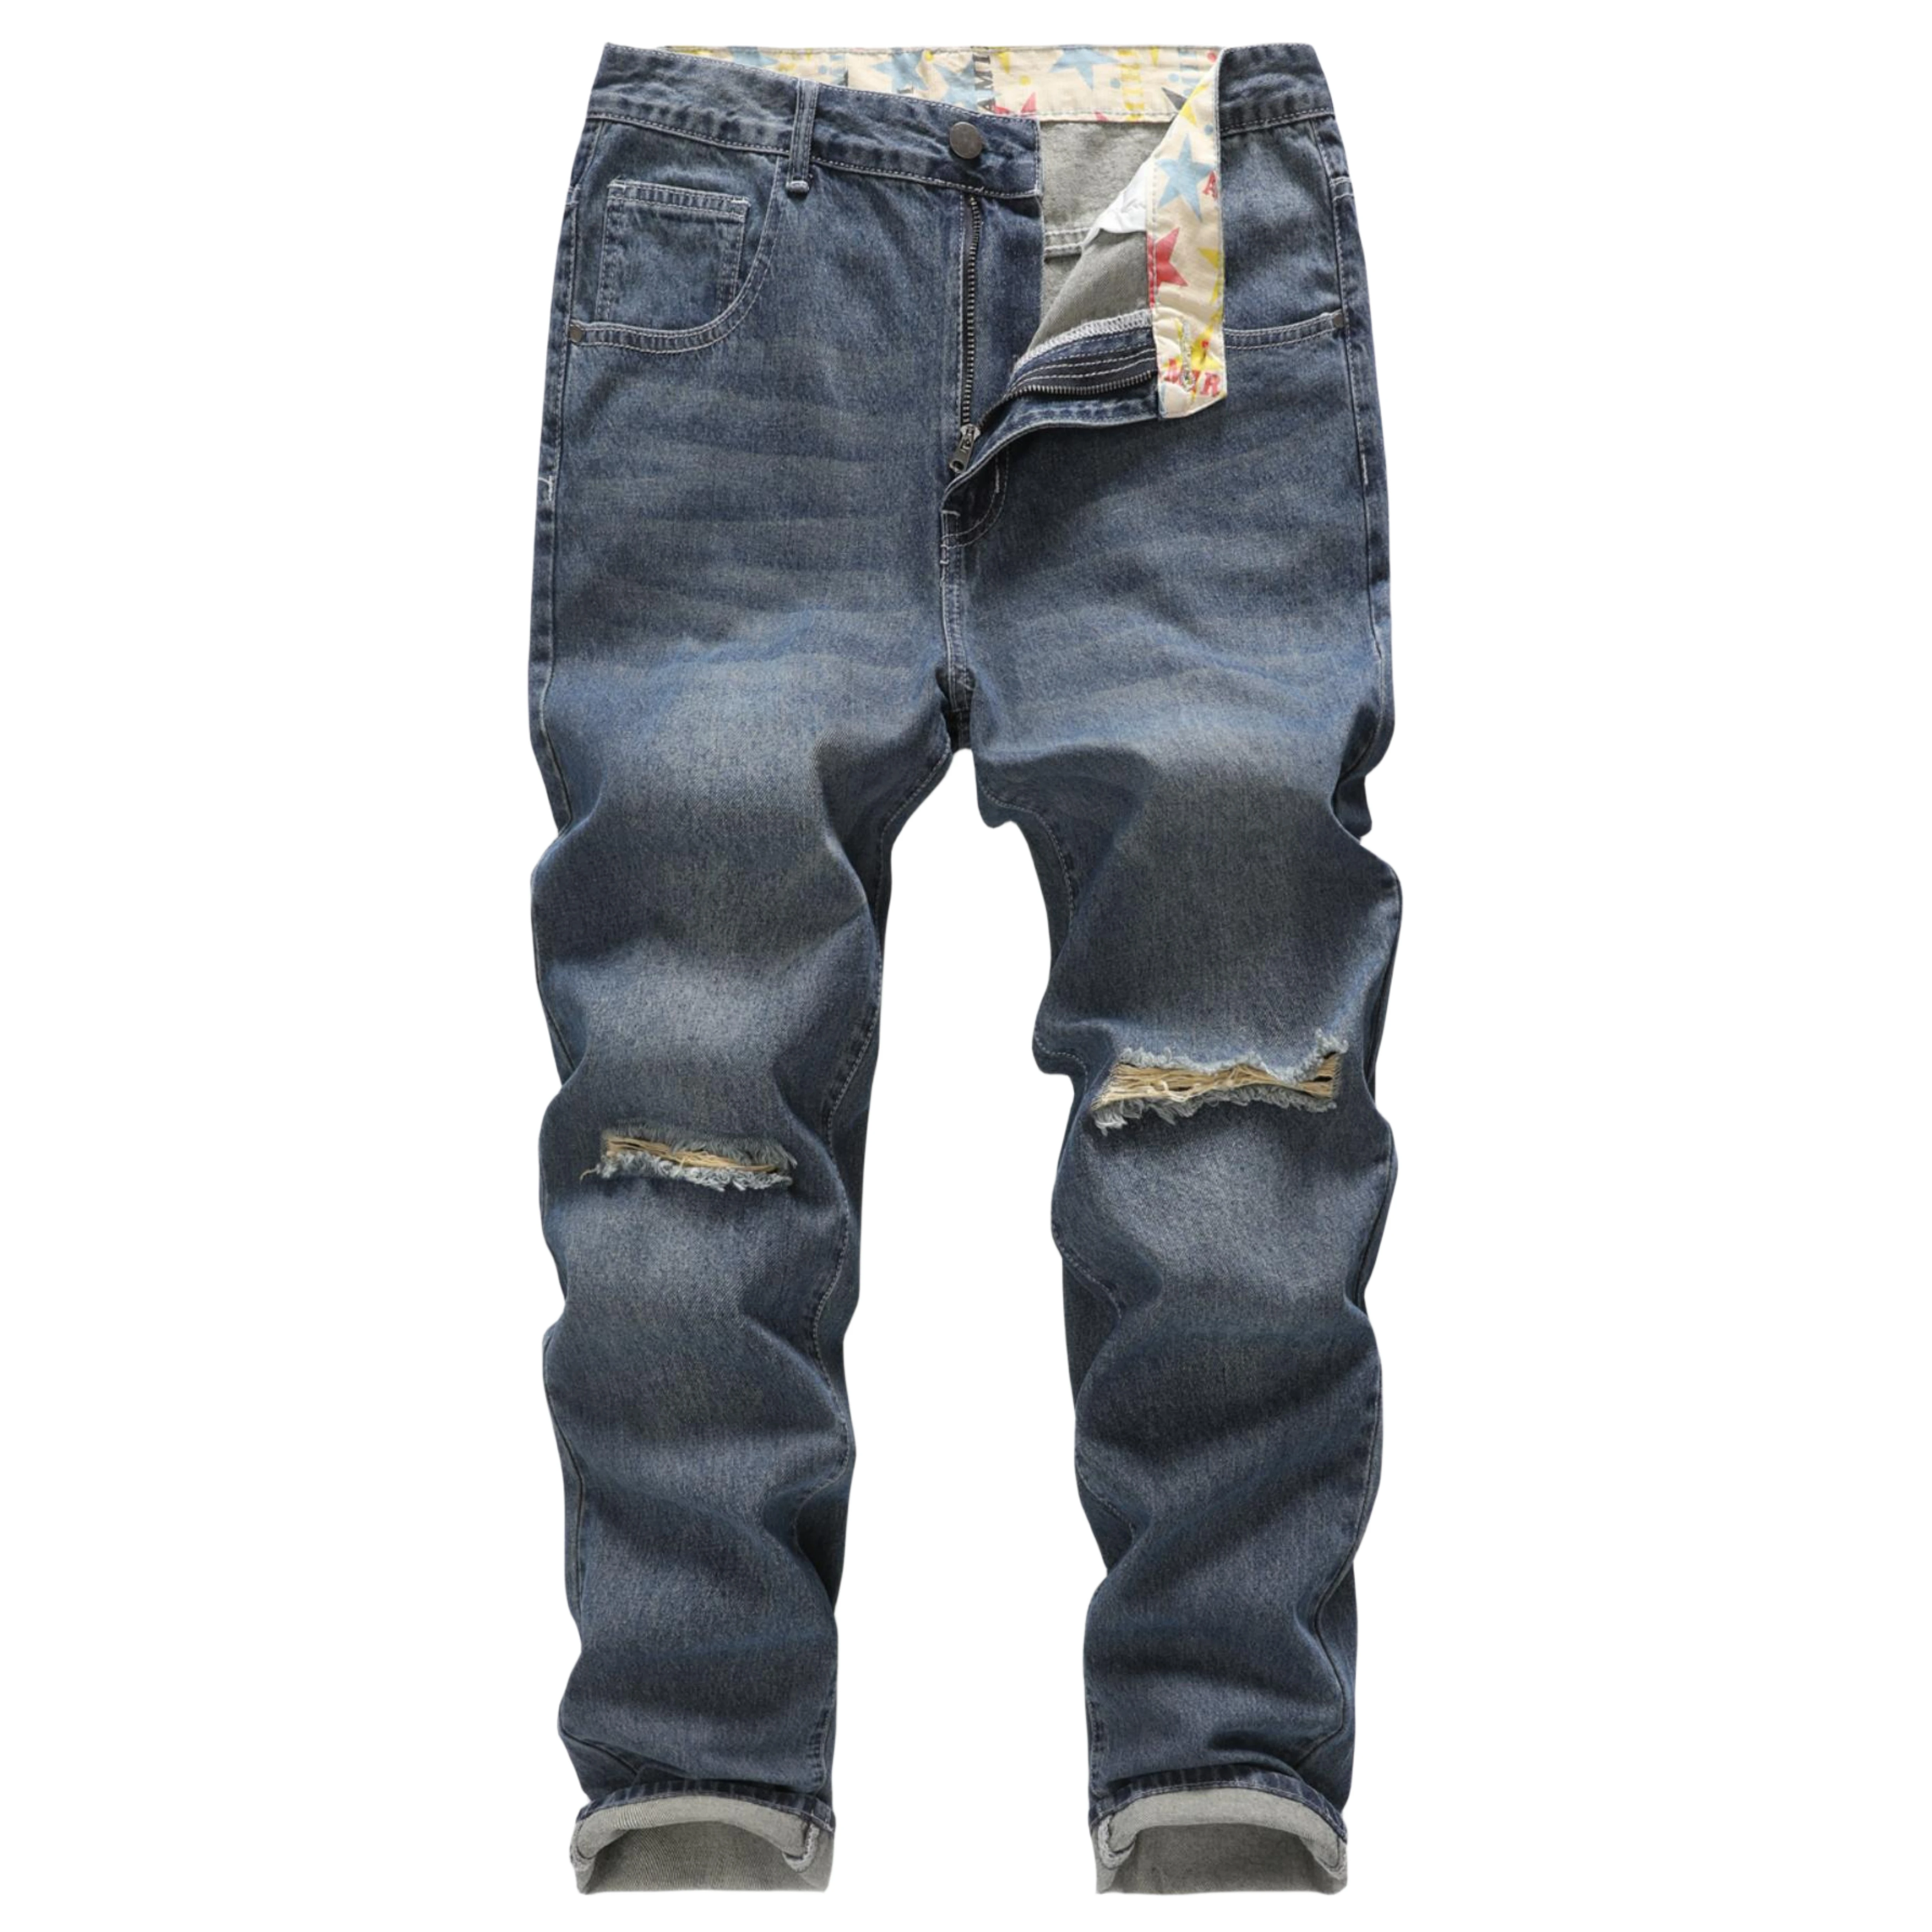 

Men's Straight Non-stretch Cotton Casual Fashion Denim Pants Ripped Frayed Bleach Wash Jeans with Color Block